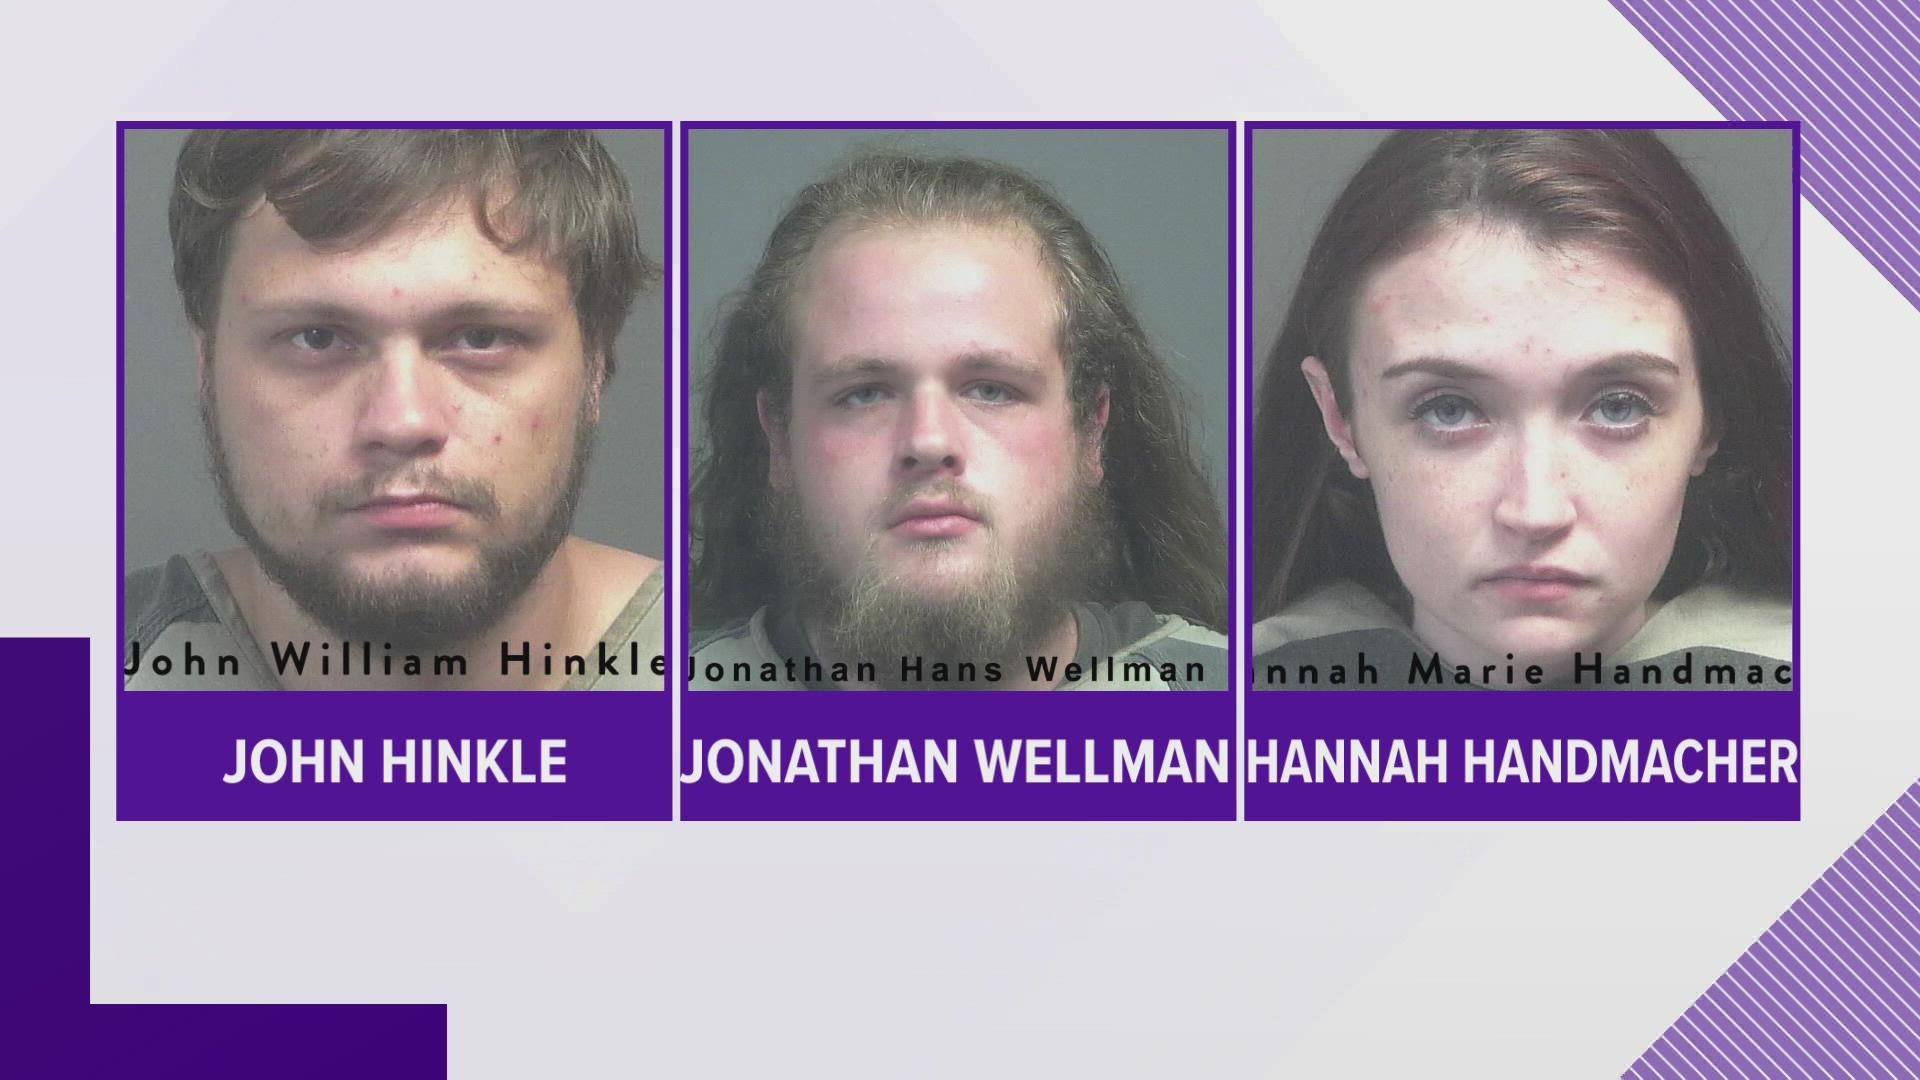 One suspect admitted that the three decided they should "try to steal a catalytic converter for money," according to the Blount County Sheriff's Office.